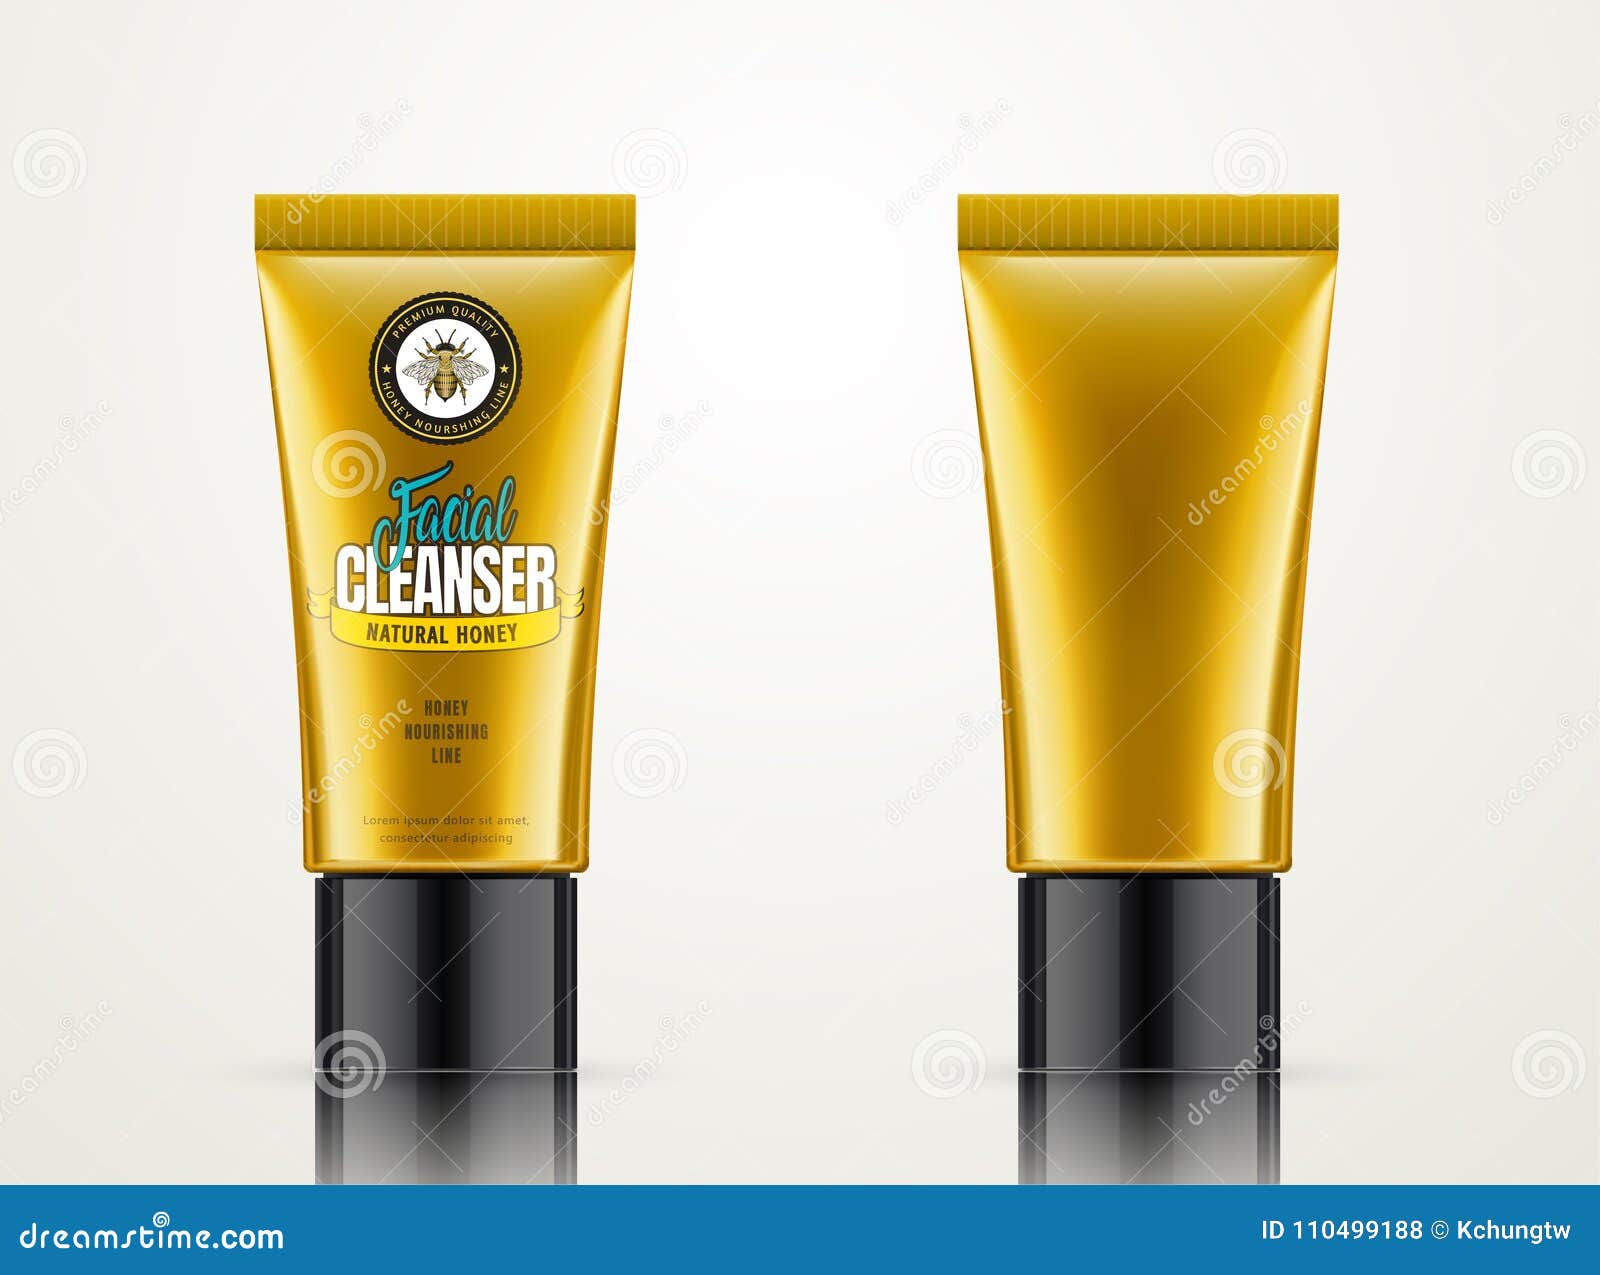 Download Facial Cleanser Container Mockup Stock Vector ...